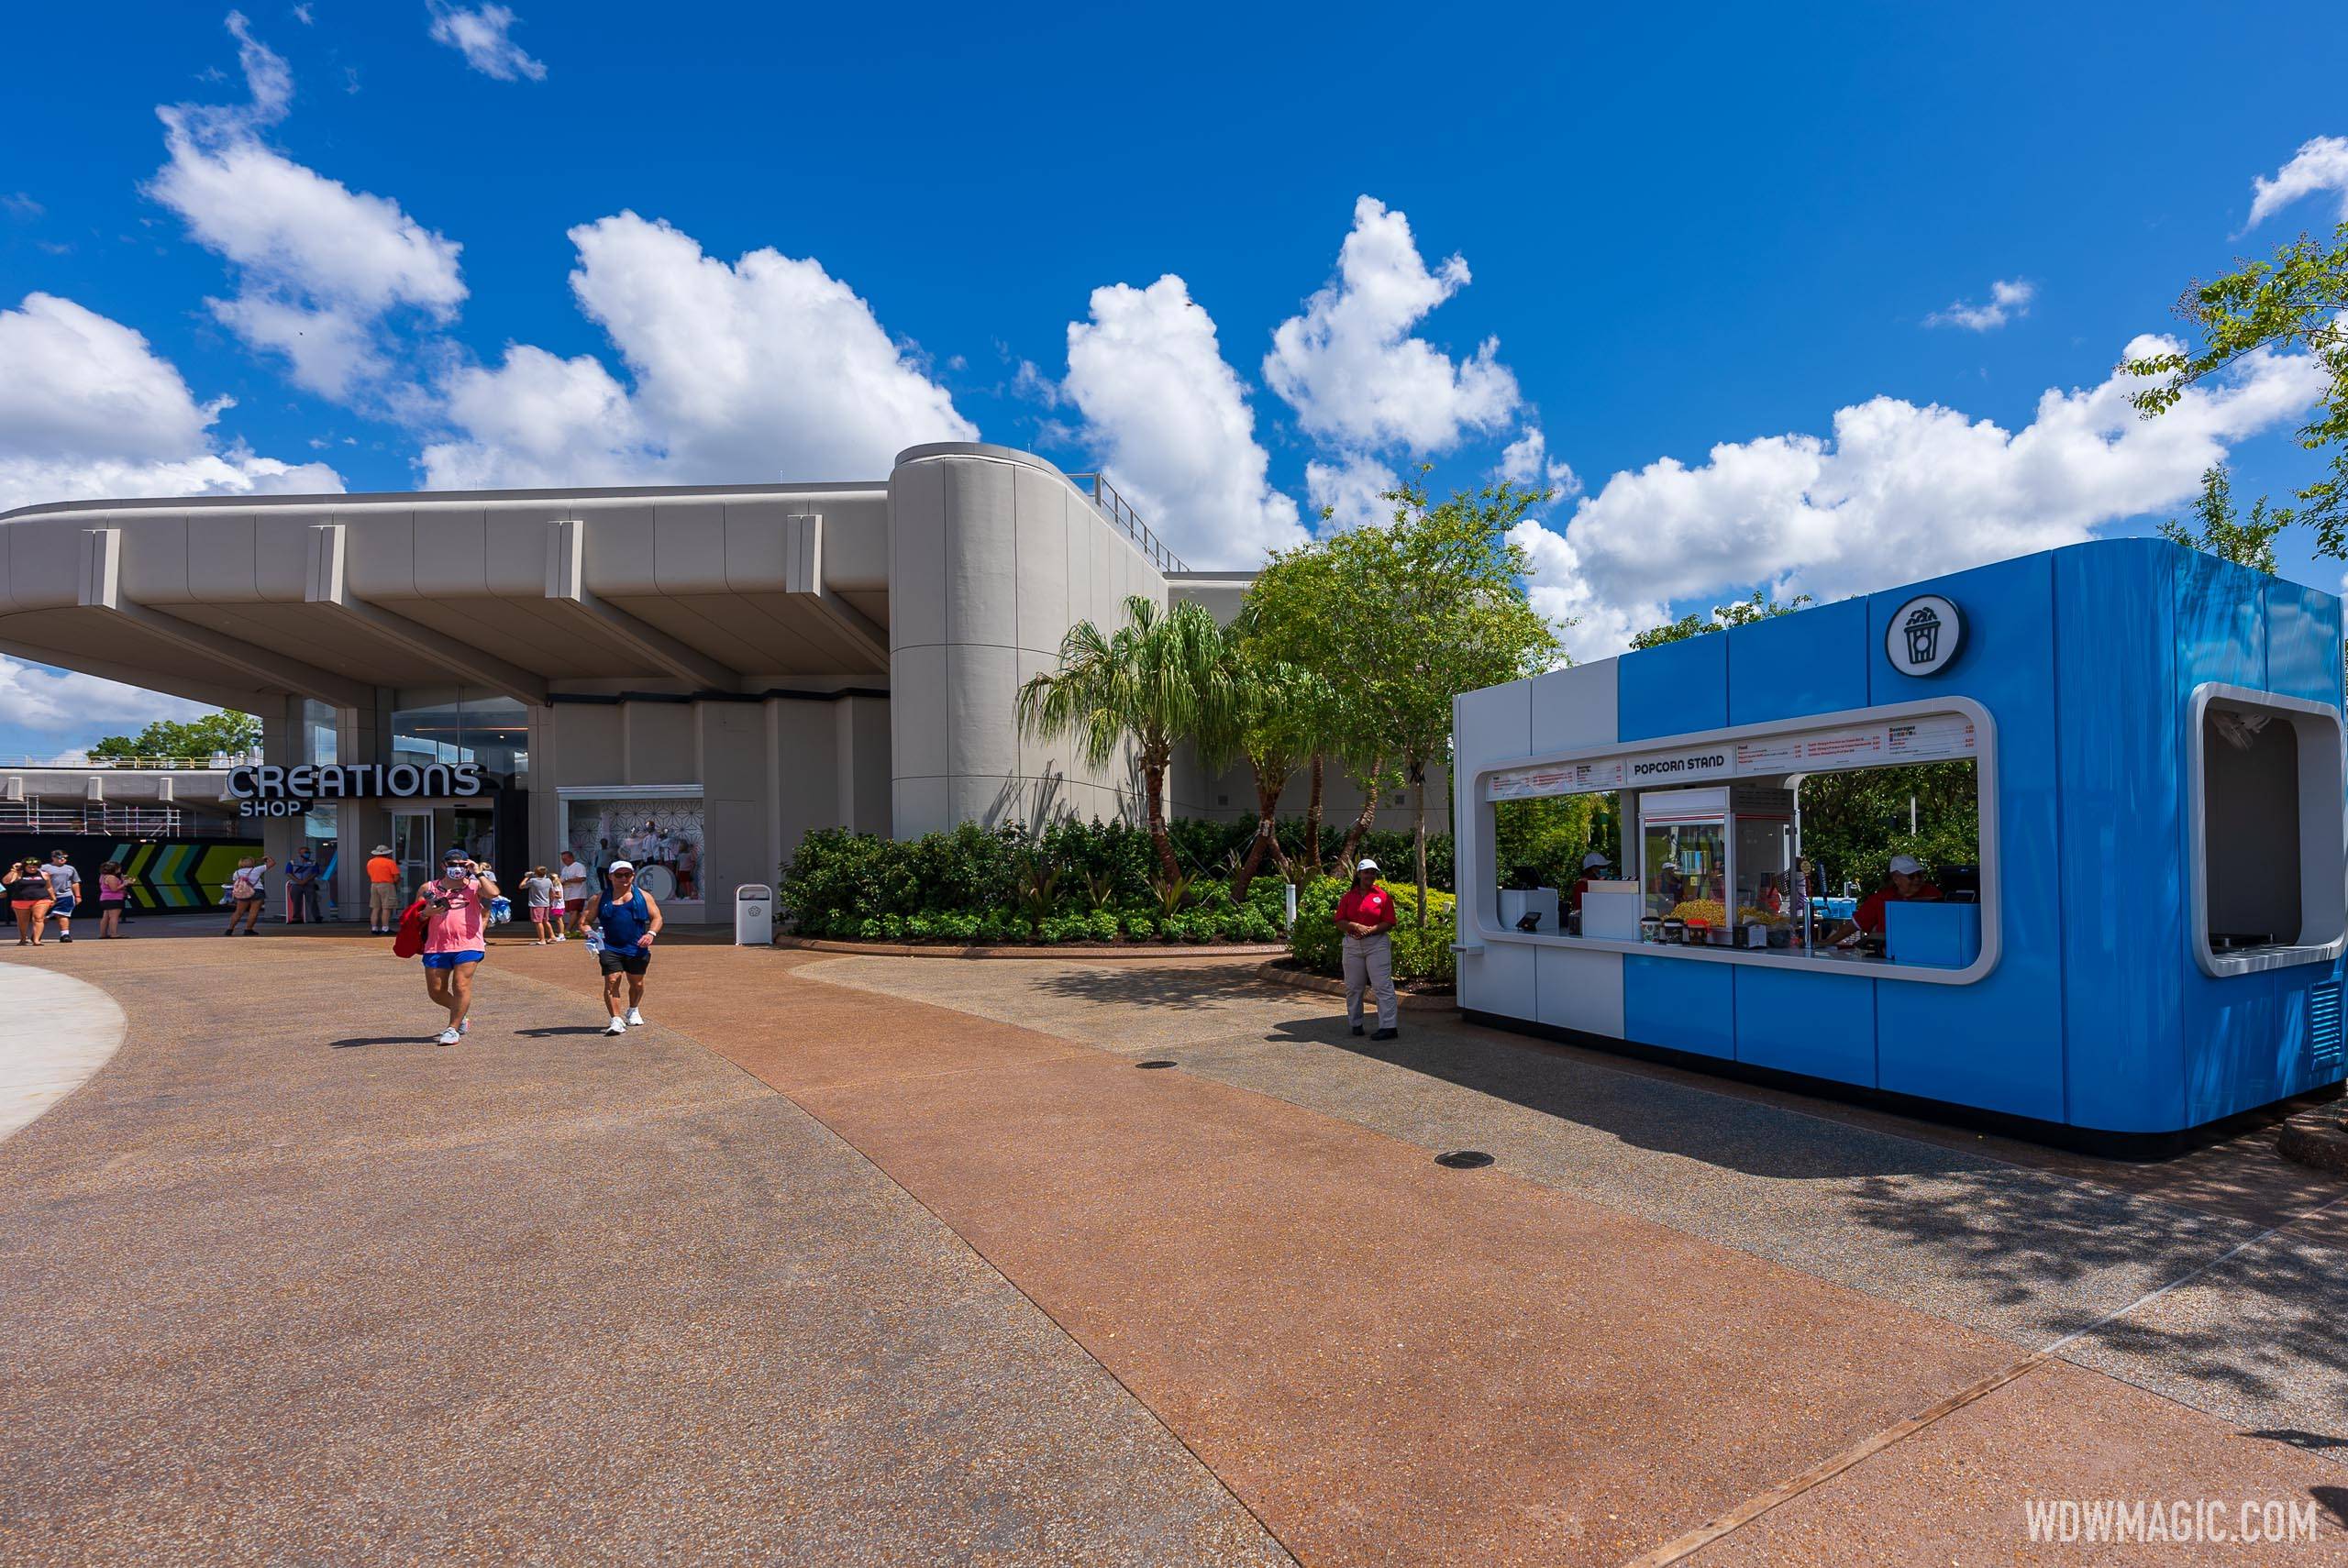 New snack kiosk opens alongside Creations Shop at EPCOT